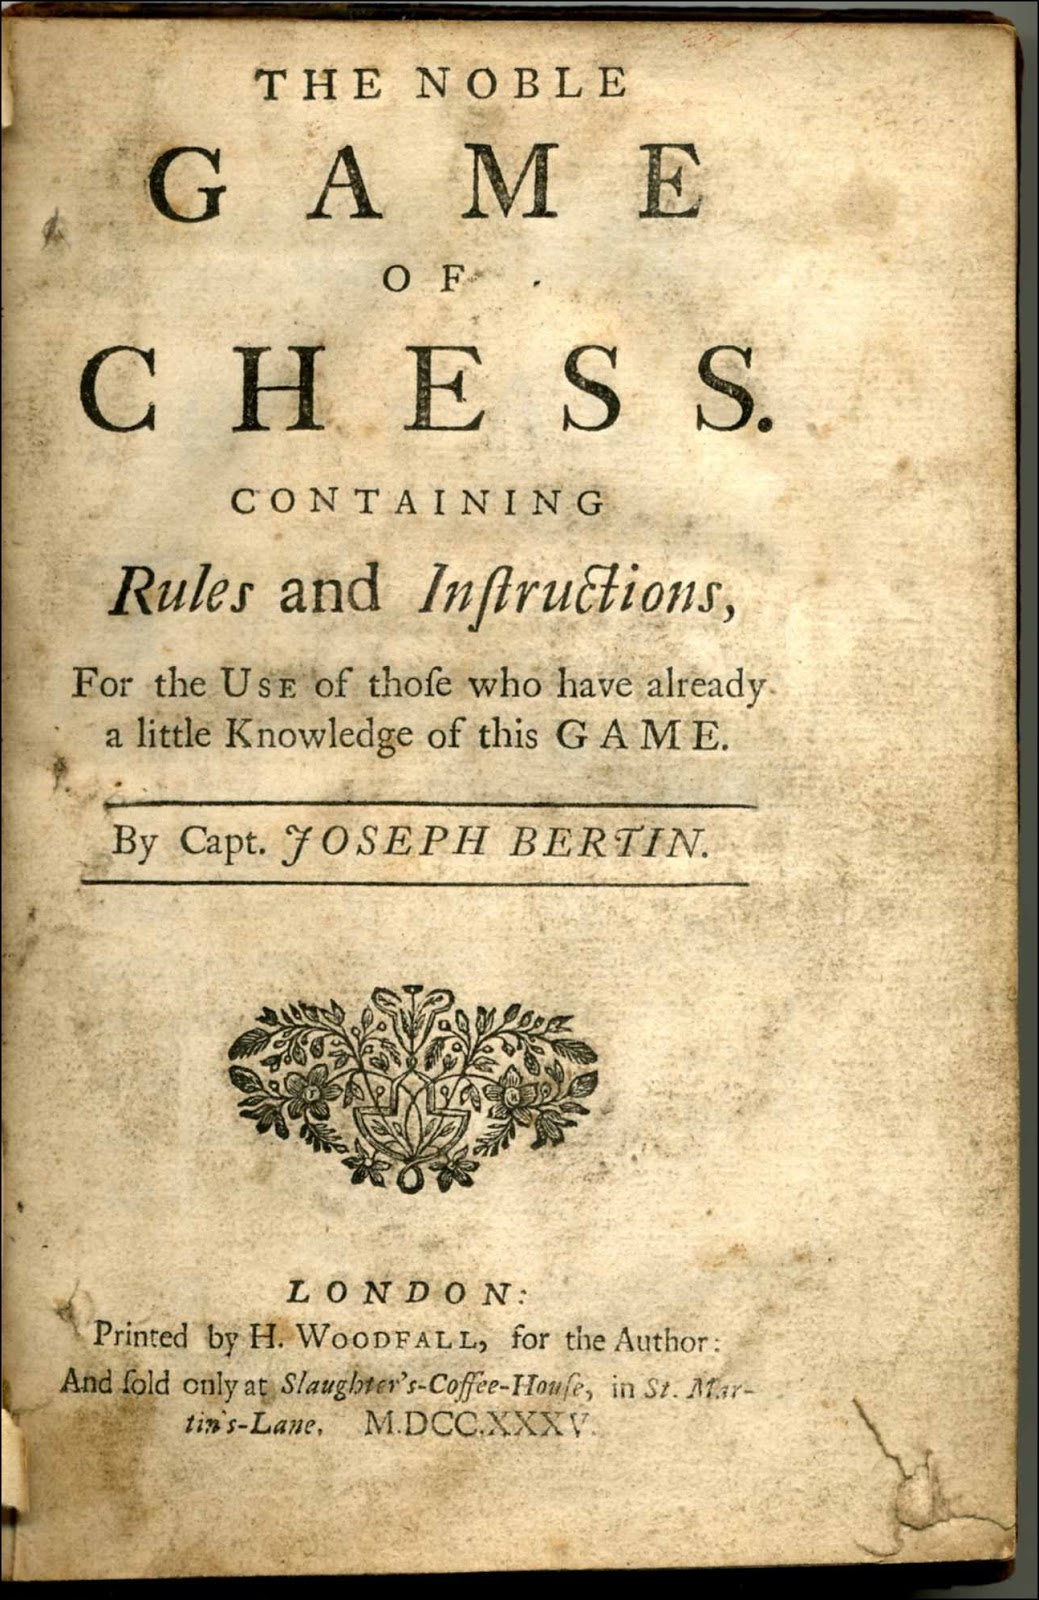 Chess Book Chats: March 2016